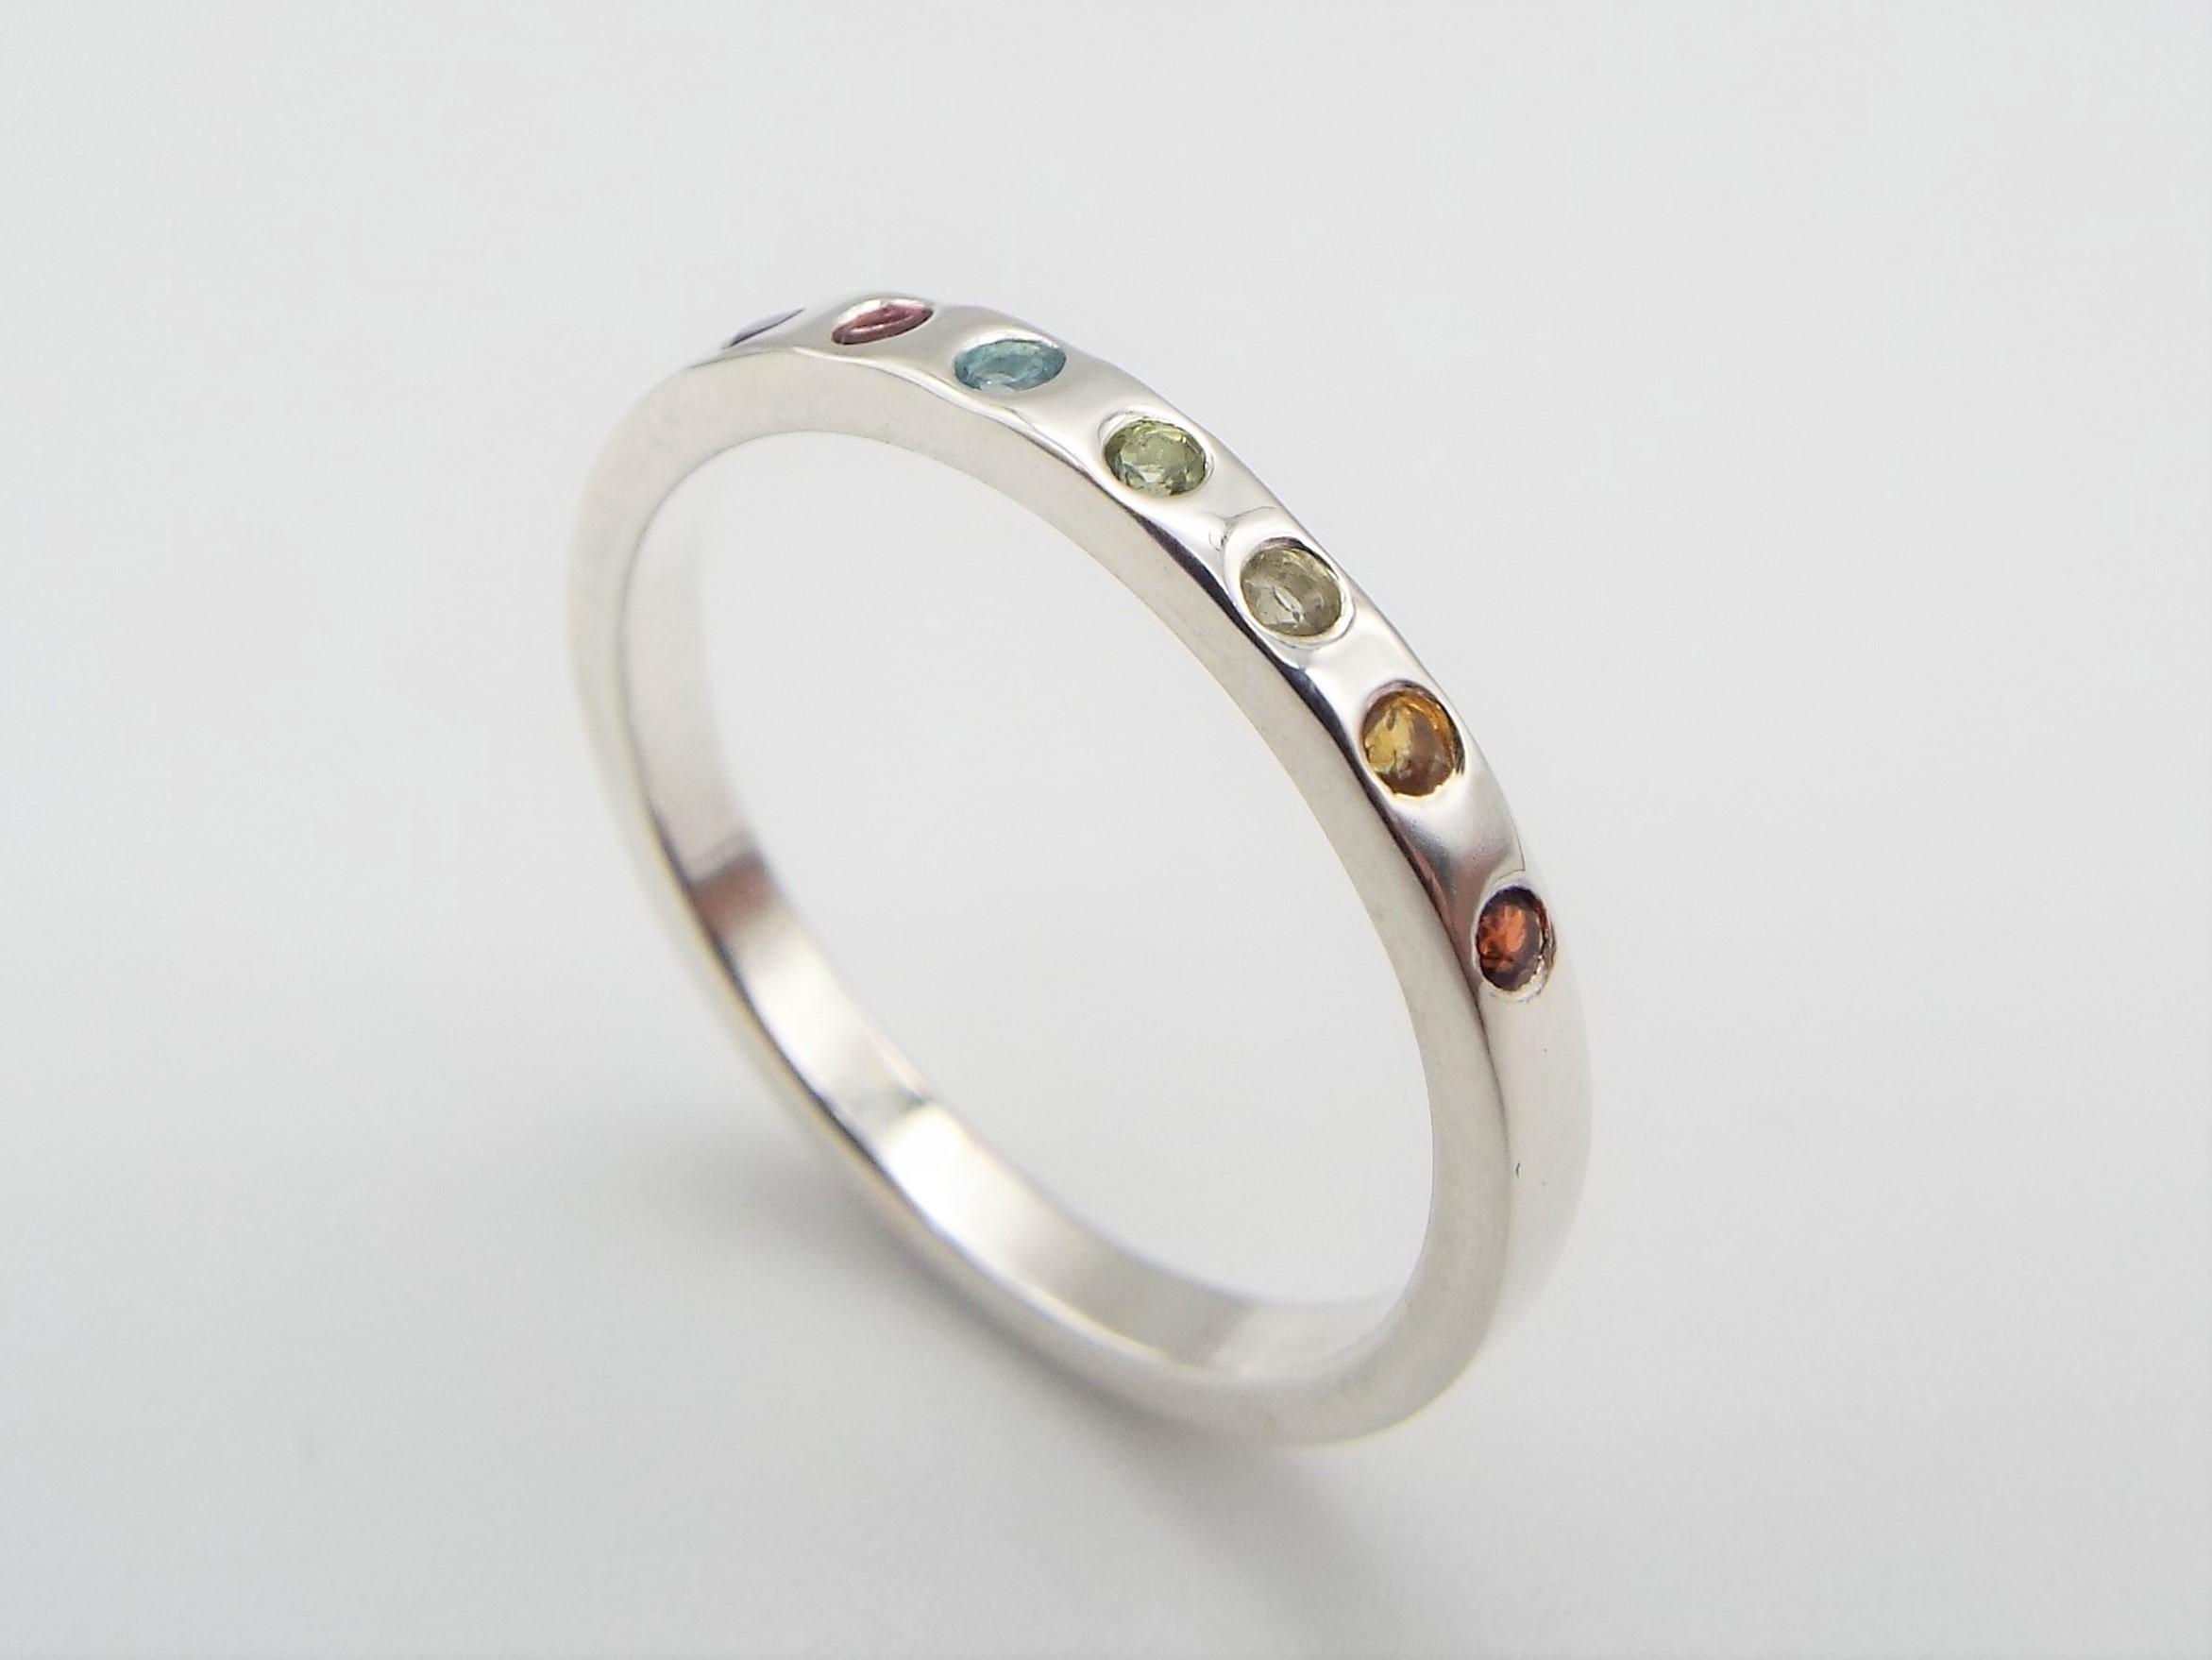 Sterling silver ring set with 7 rainbow gemstones